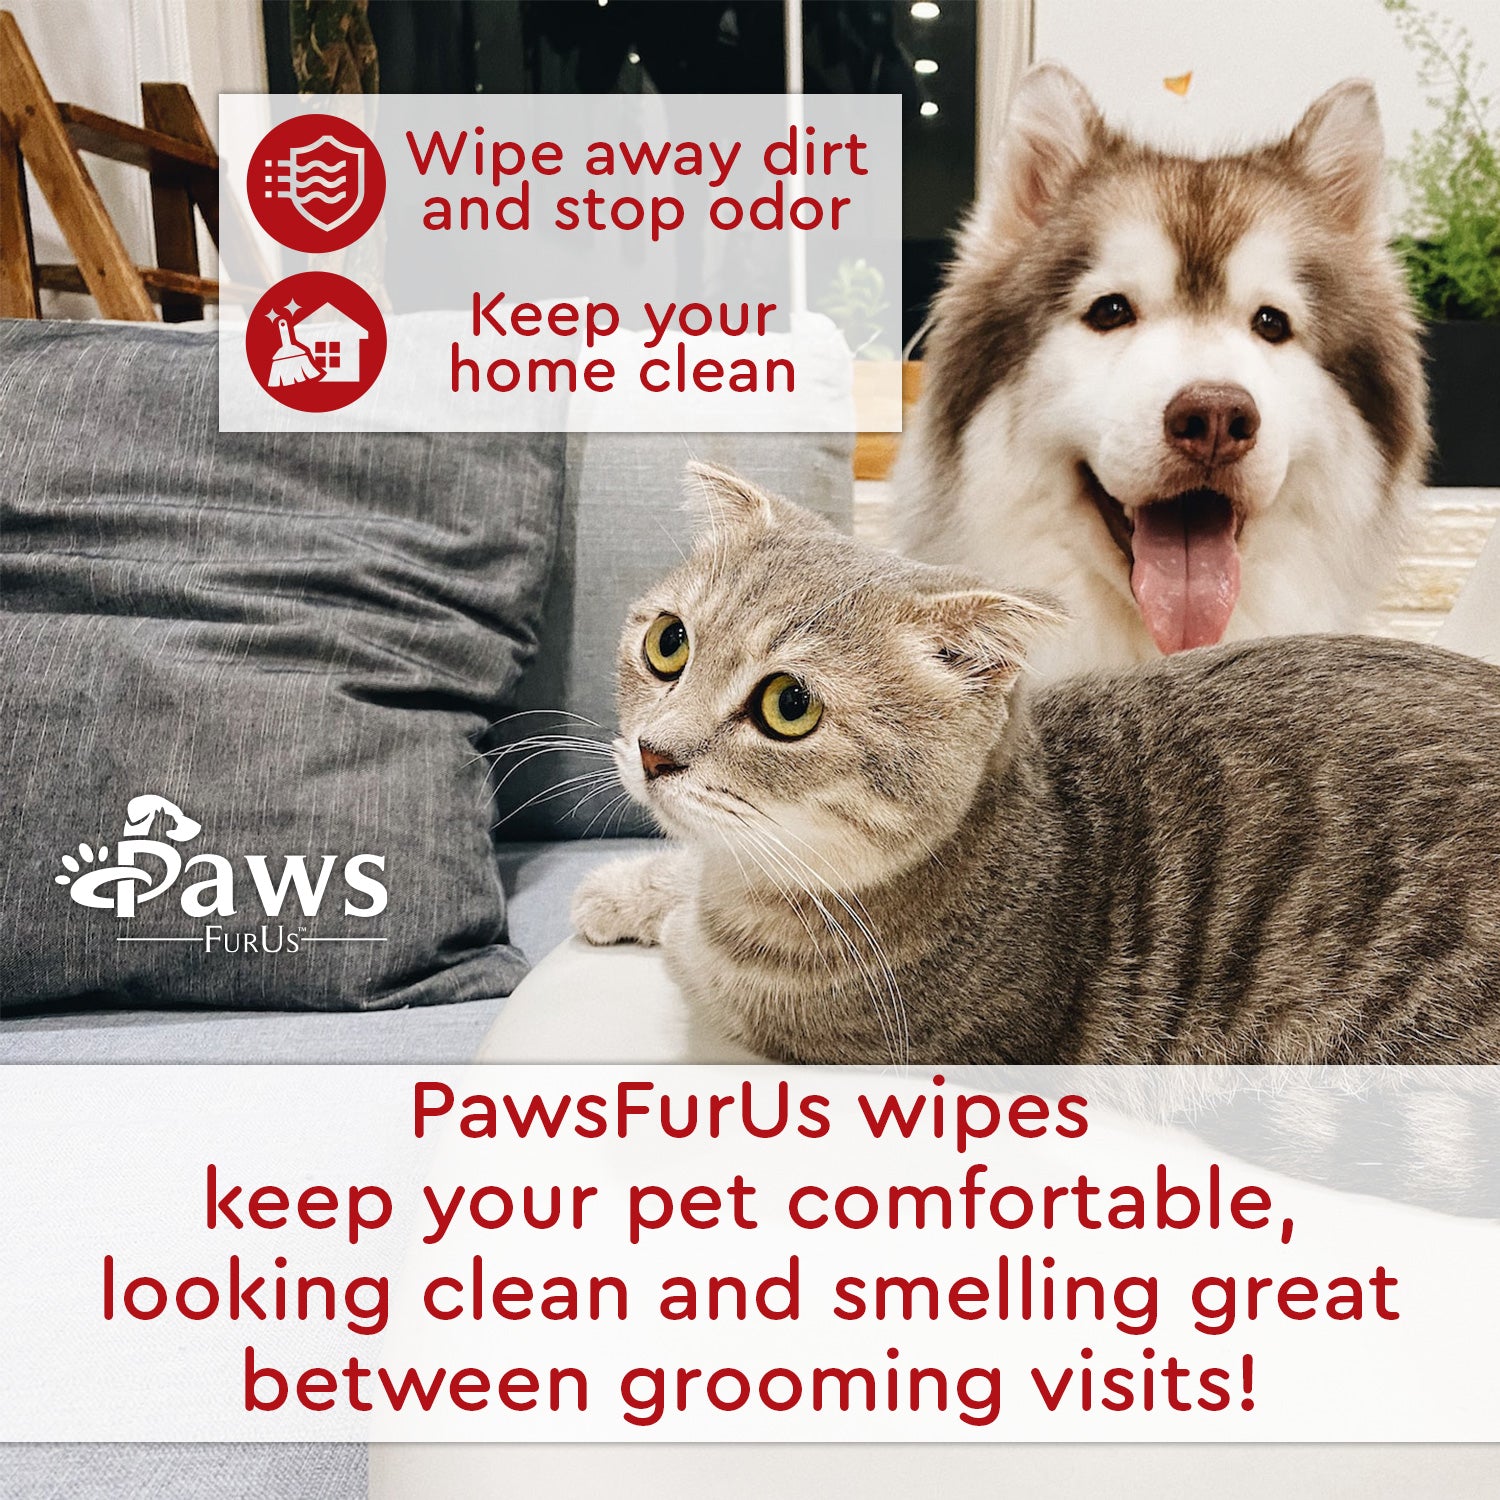 Wipe away dirt and stop odor. Keep your home clean. PawsFurUs wipes keep your pet comfortable, looking clean and smelling great between grooming visits!